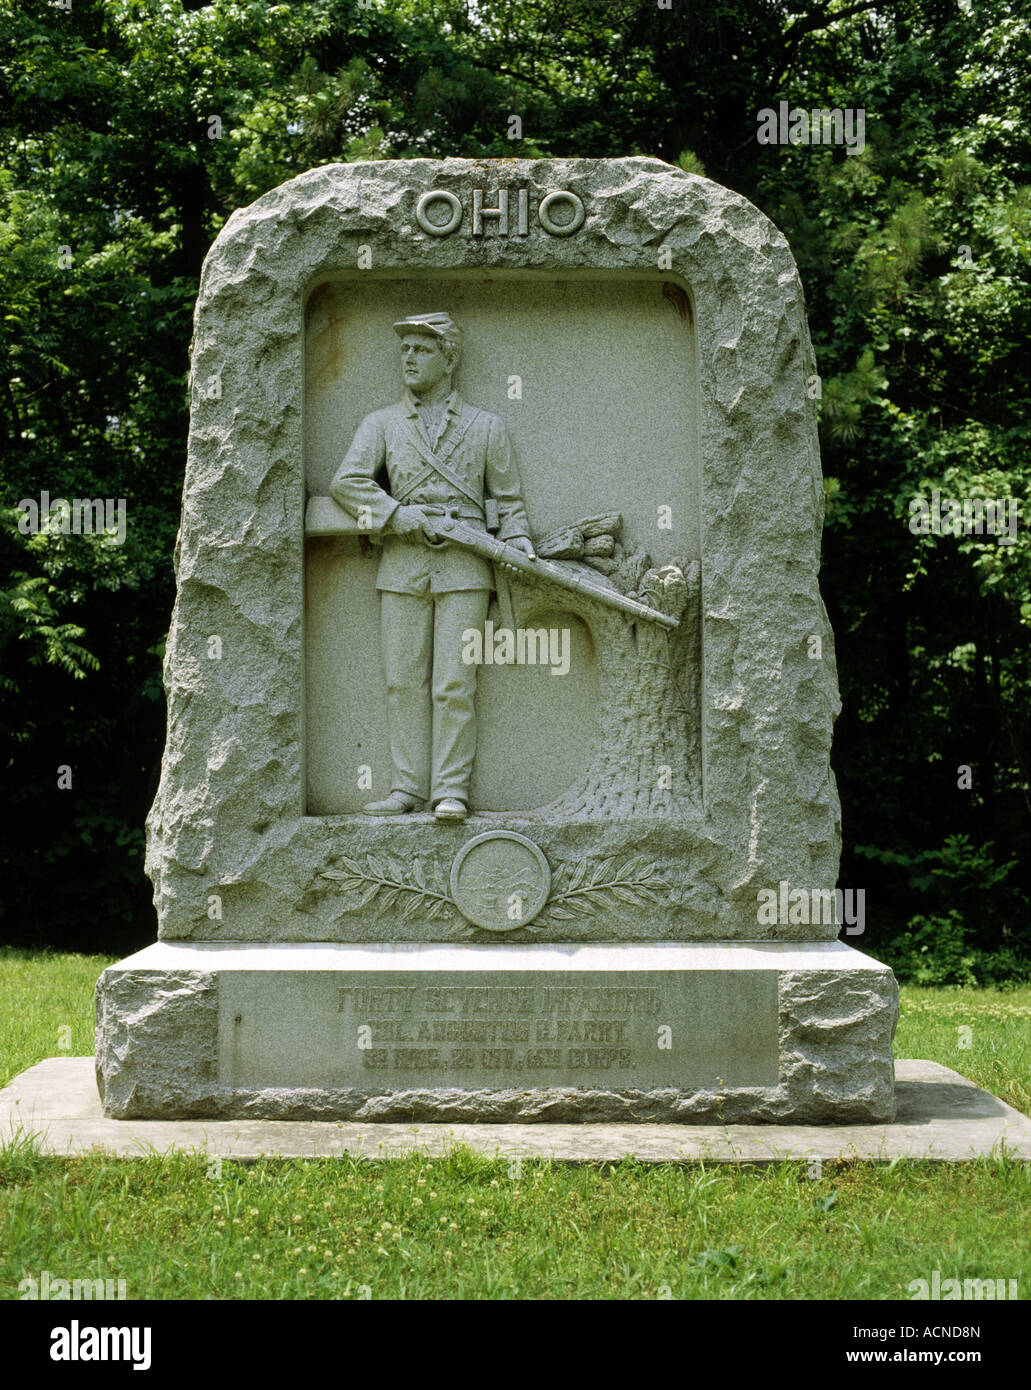 geography/travel, USA, Mississippi, Vicksburg, National Military Parl, memorial, 47th Ohio Infantry Regiment, Colonel Agustus C. Stock Photo